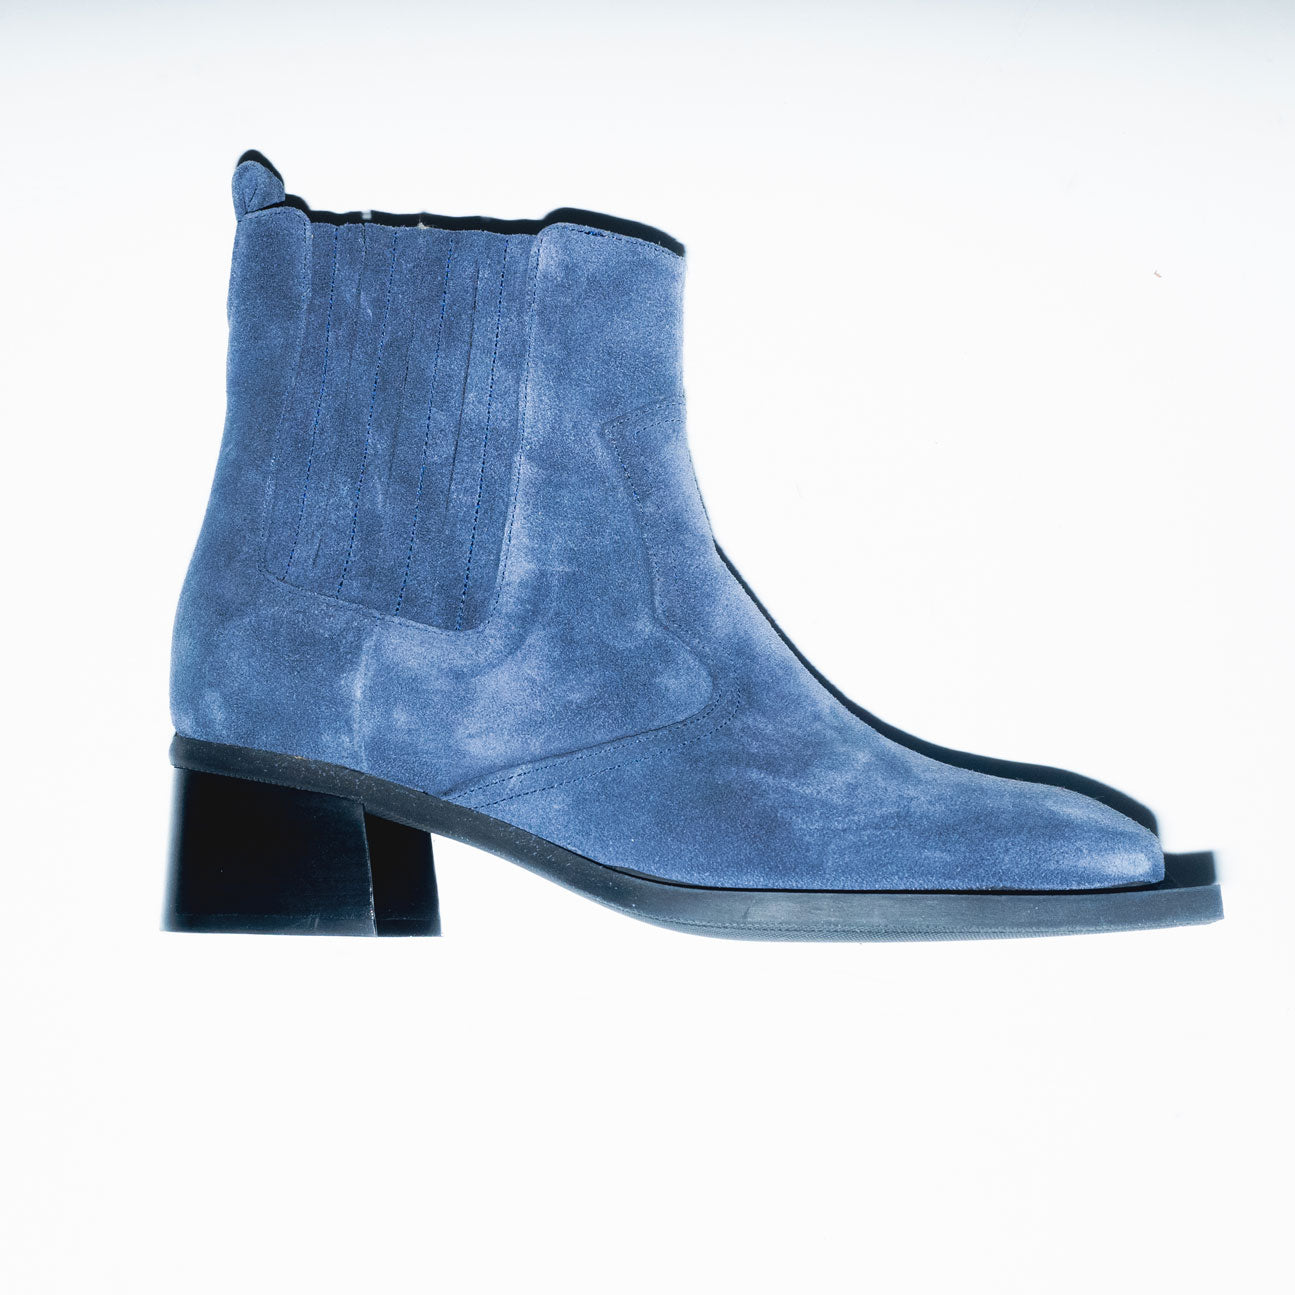 Archive Howler Ankle Boots in Office Blue Suede Leather